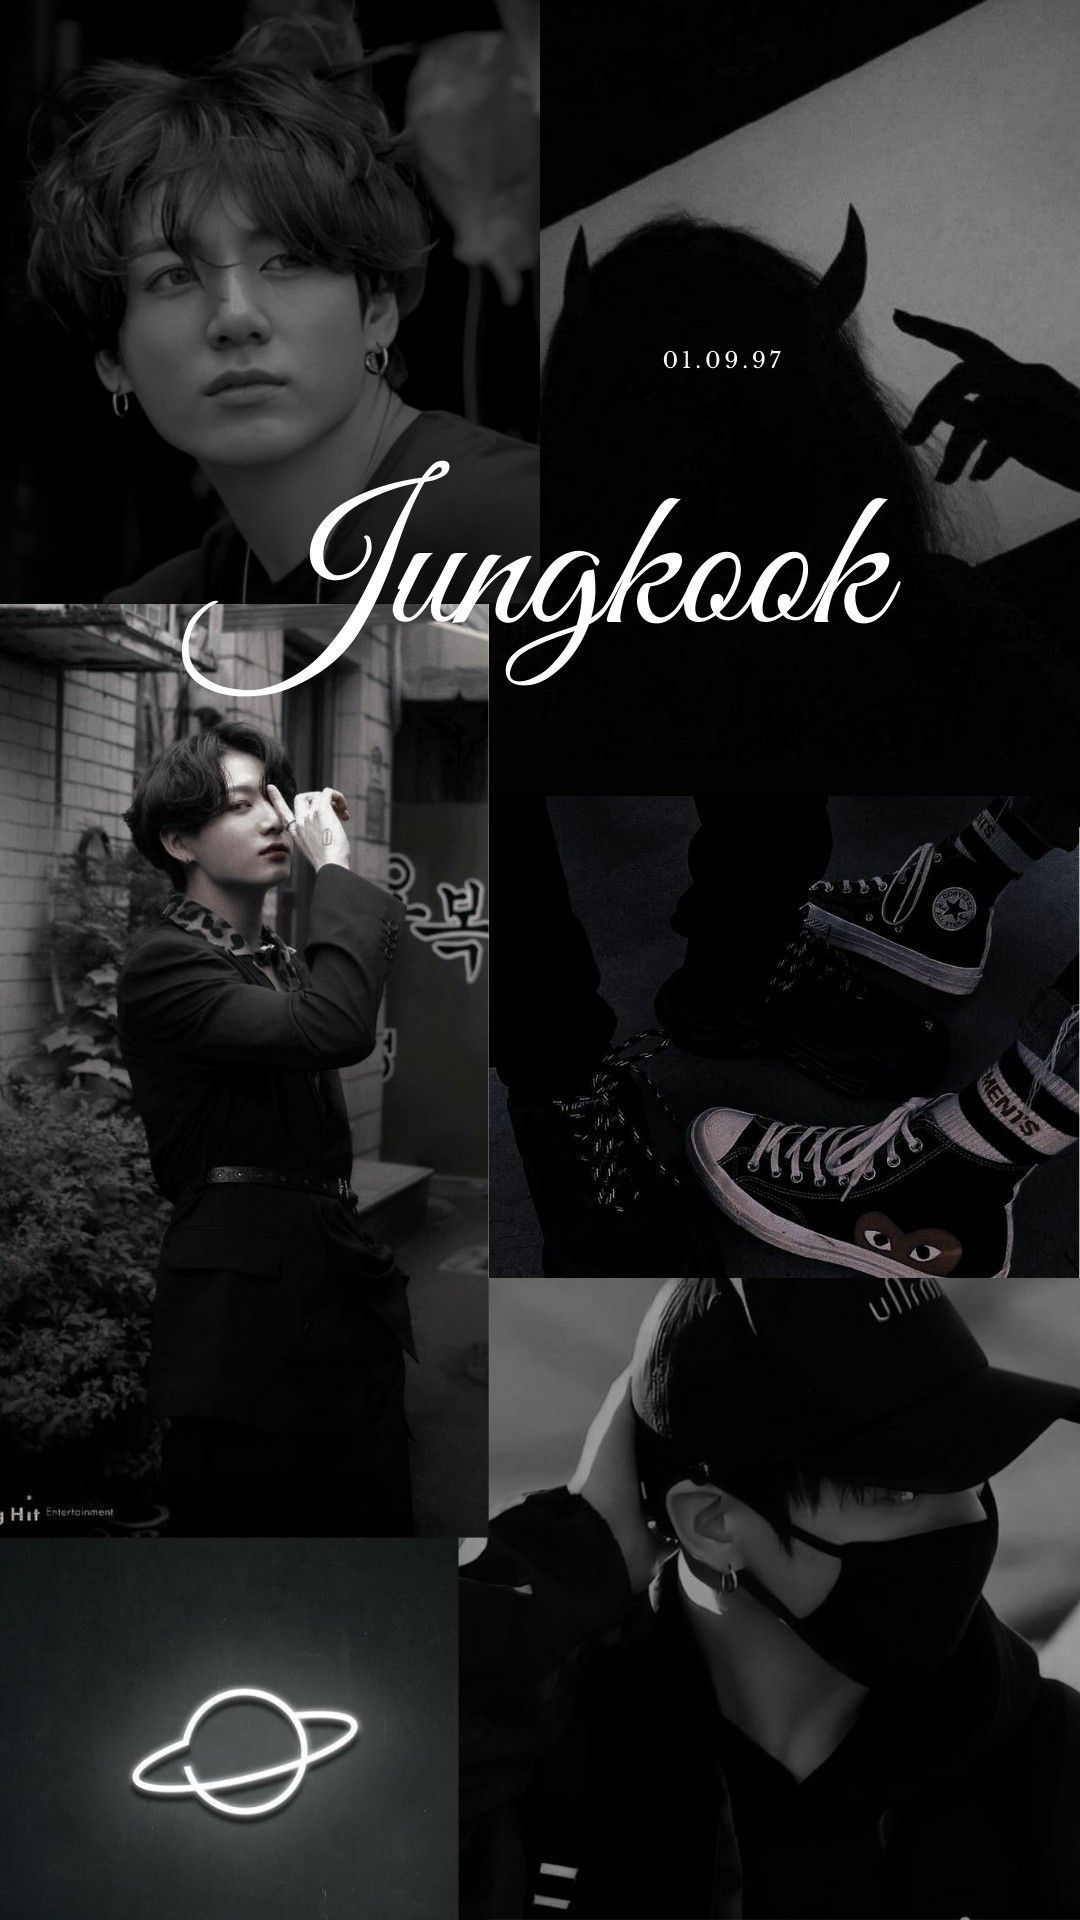 Jungkook wallpaper by me! Credit to the rightful owners. - Jungkook